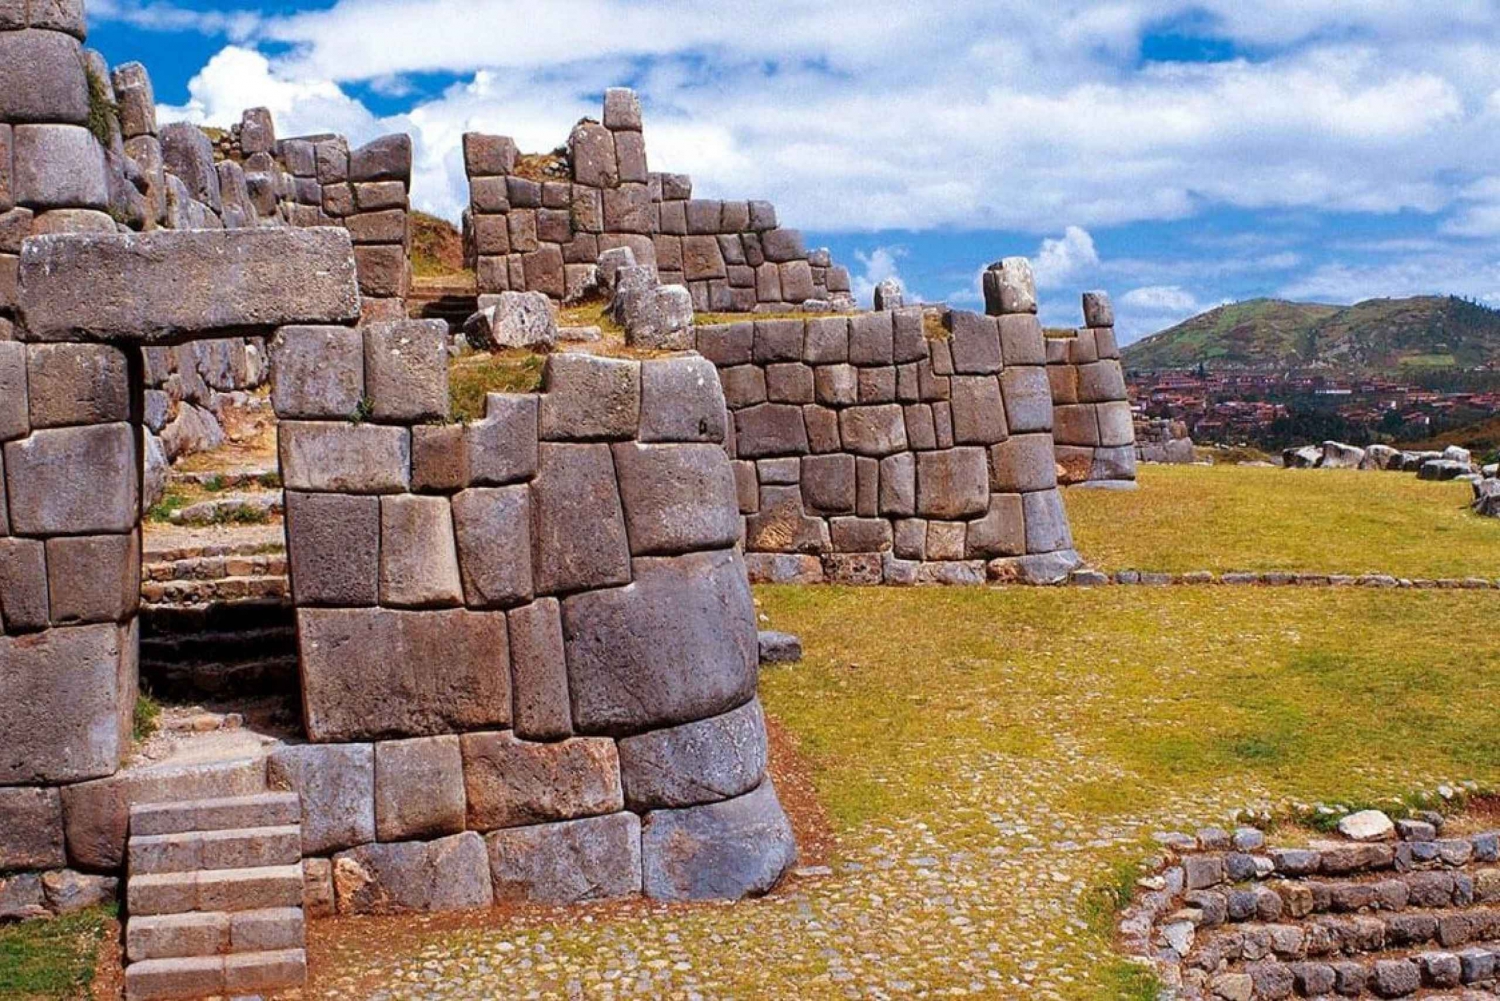 From Cusco: Guided tour of Cusco and its 4 ruins